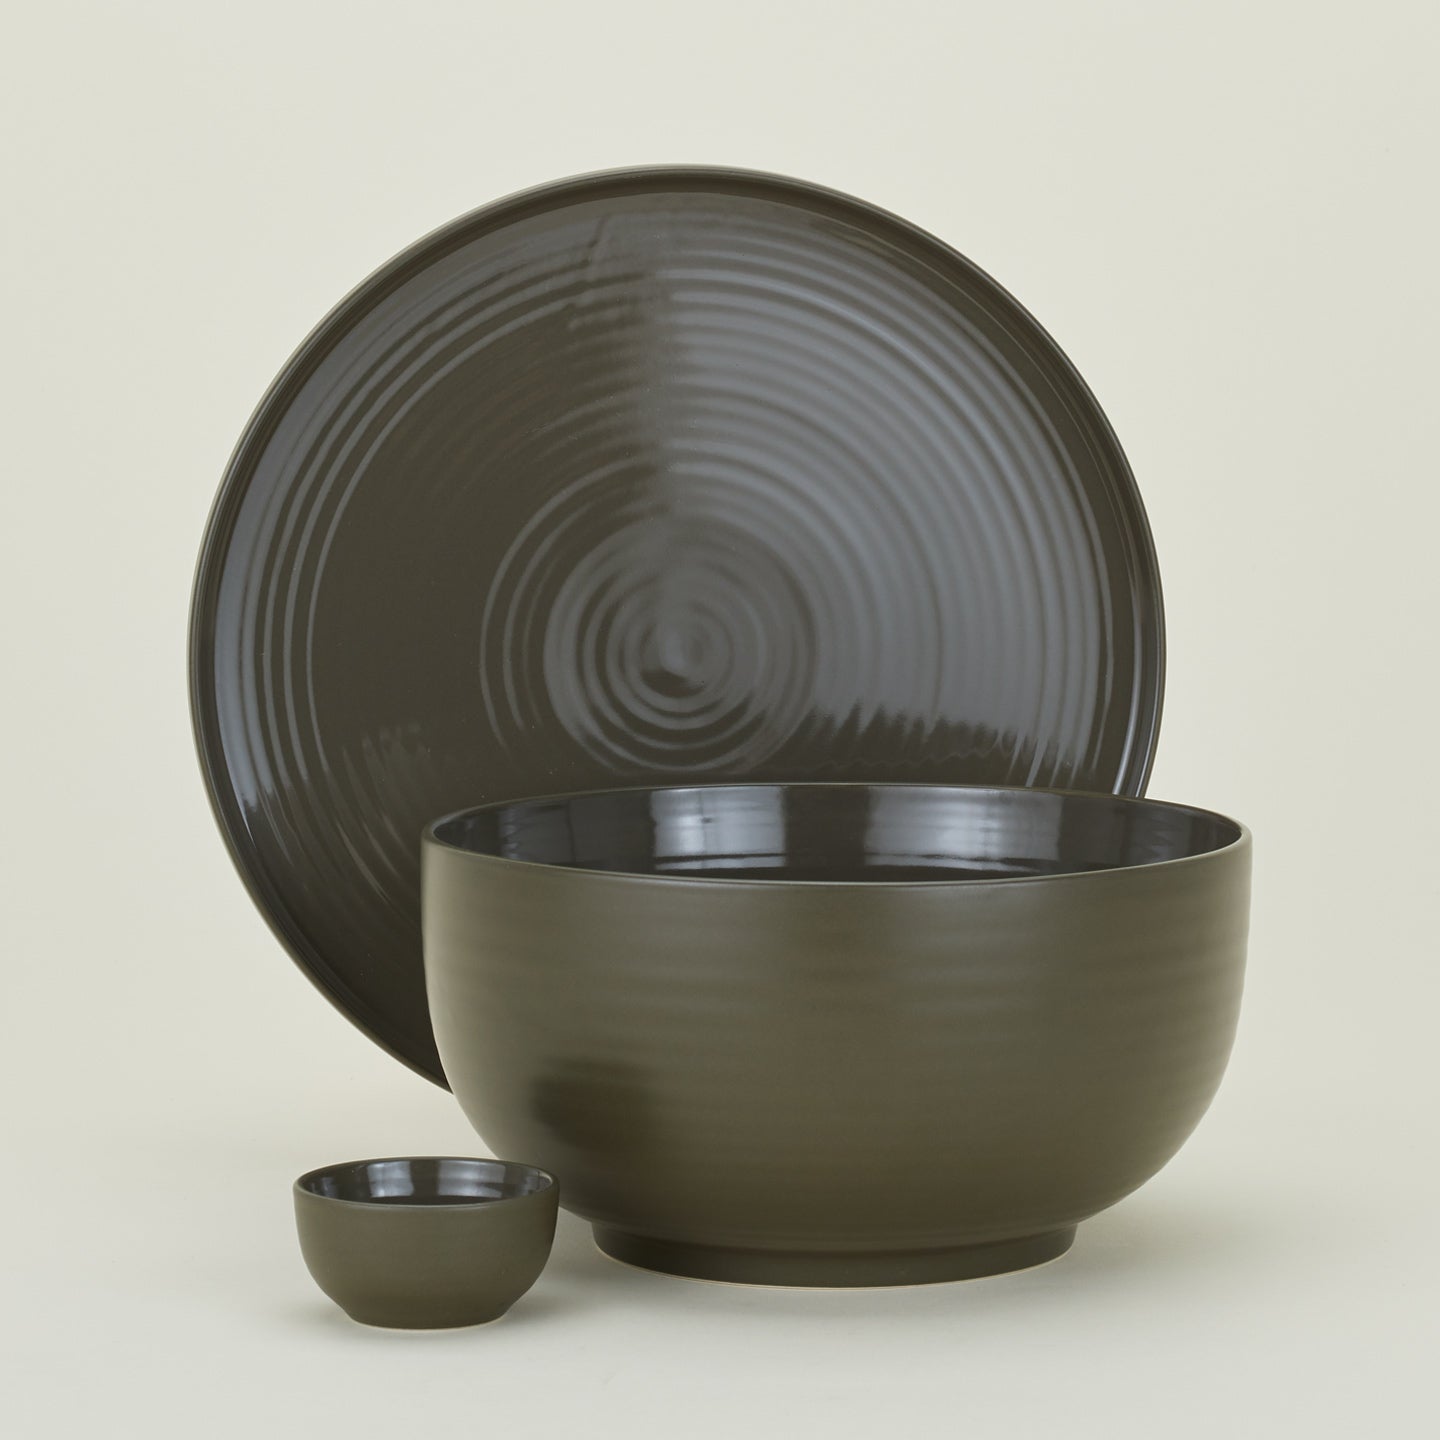 Group of Essential serving pieces in Olive including bowl, platter and extra small bowl.